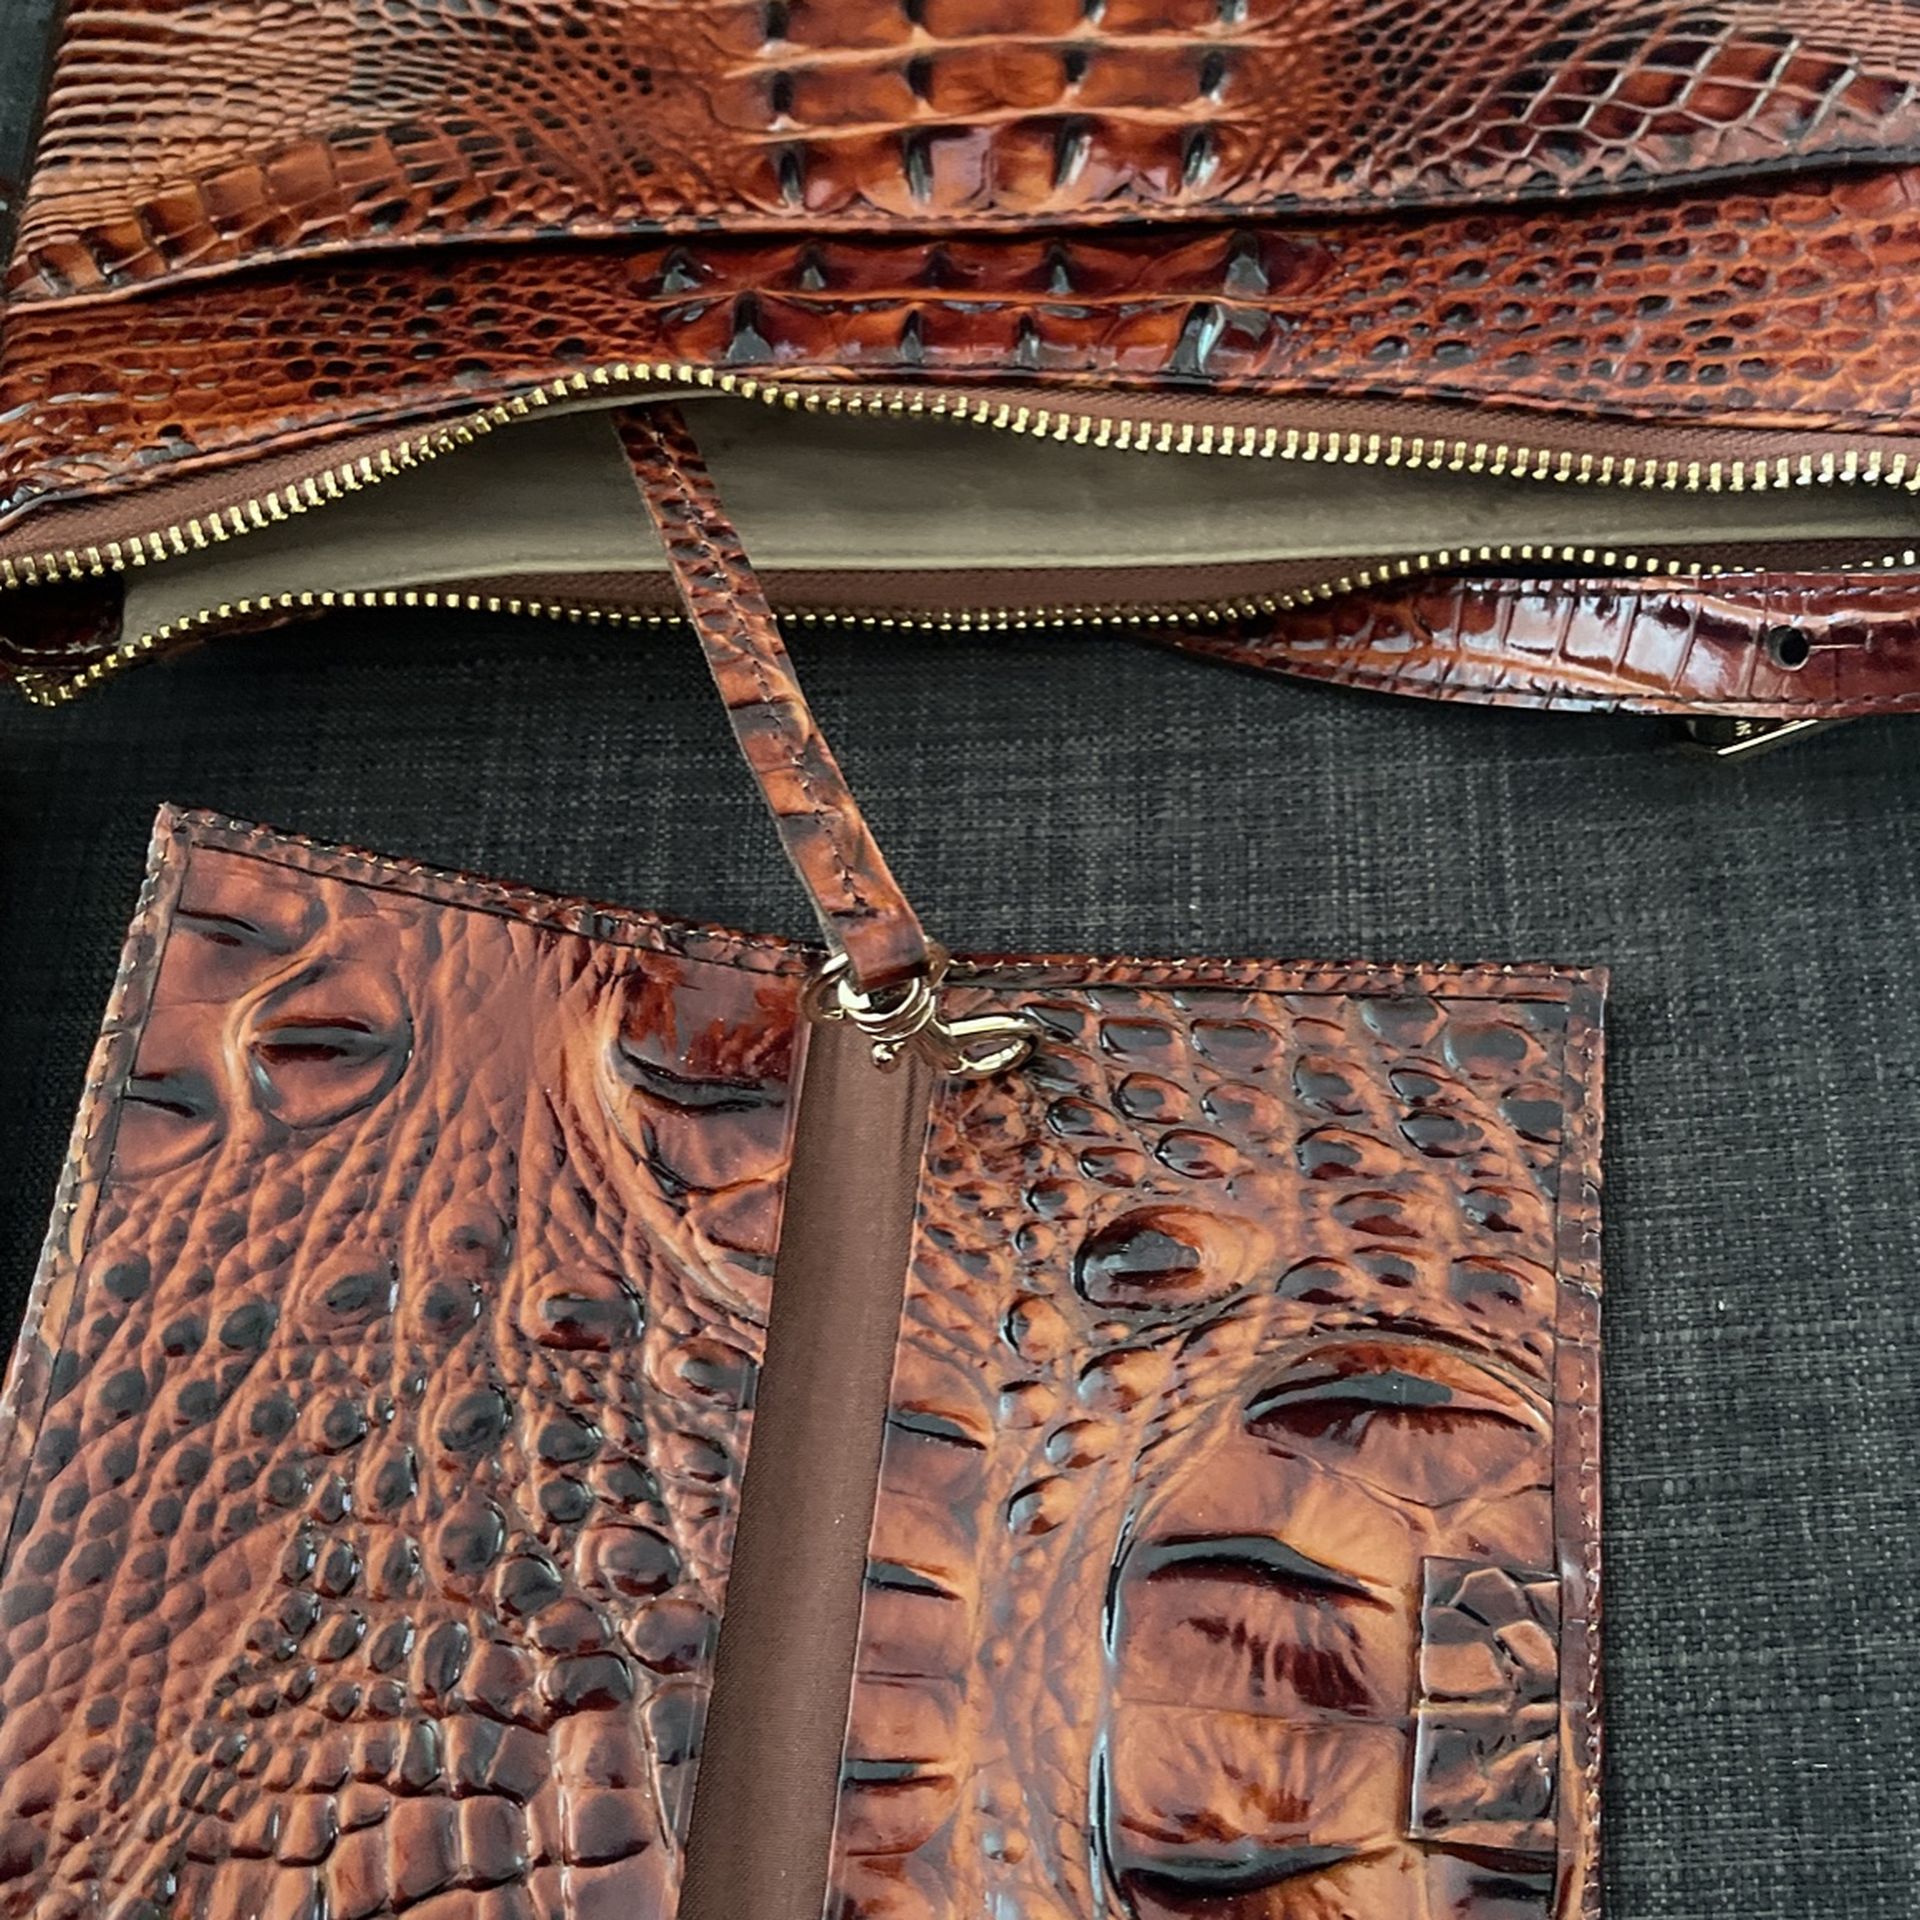 Brahmin Shoulder Purse With Wallet And Checkbook Cover for Sale in  Indianapolis, IN - OfferUp